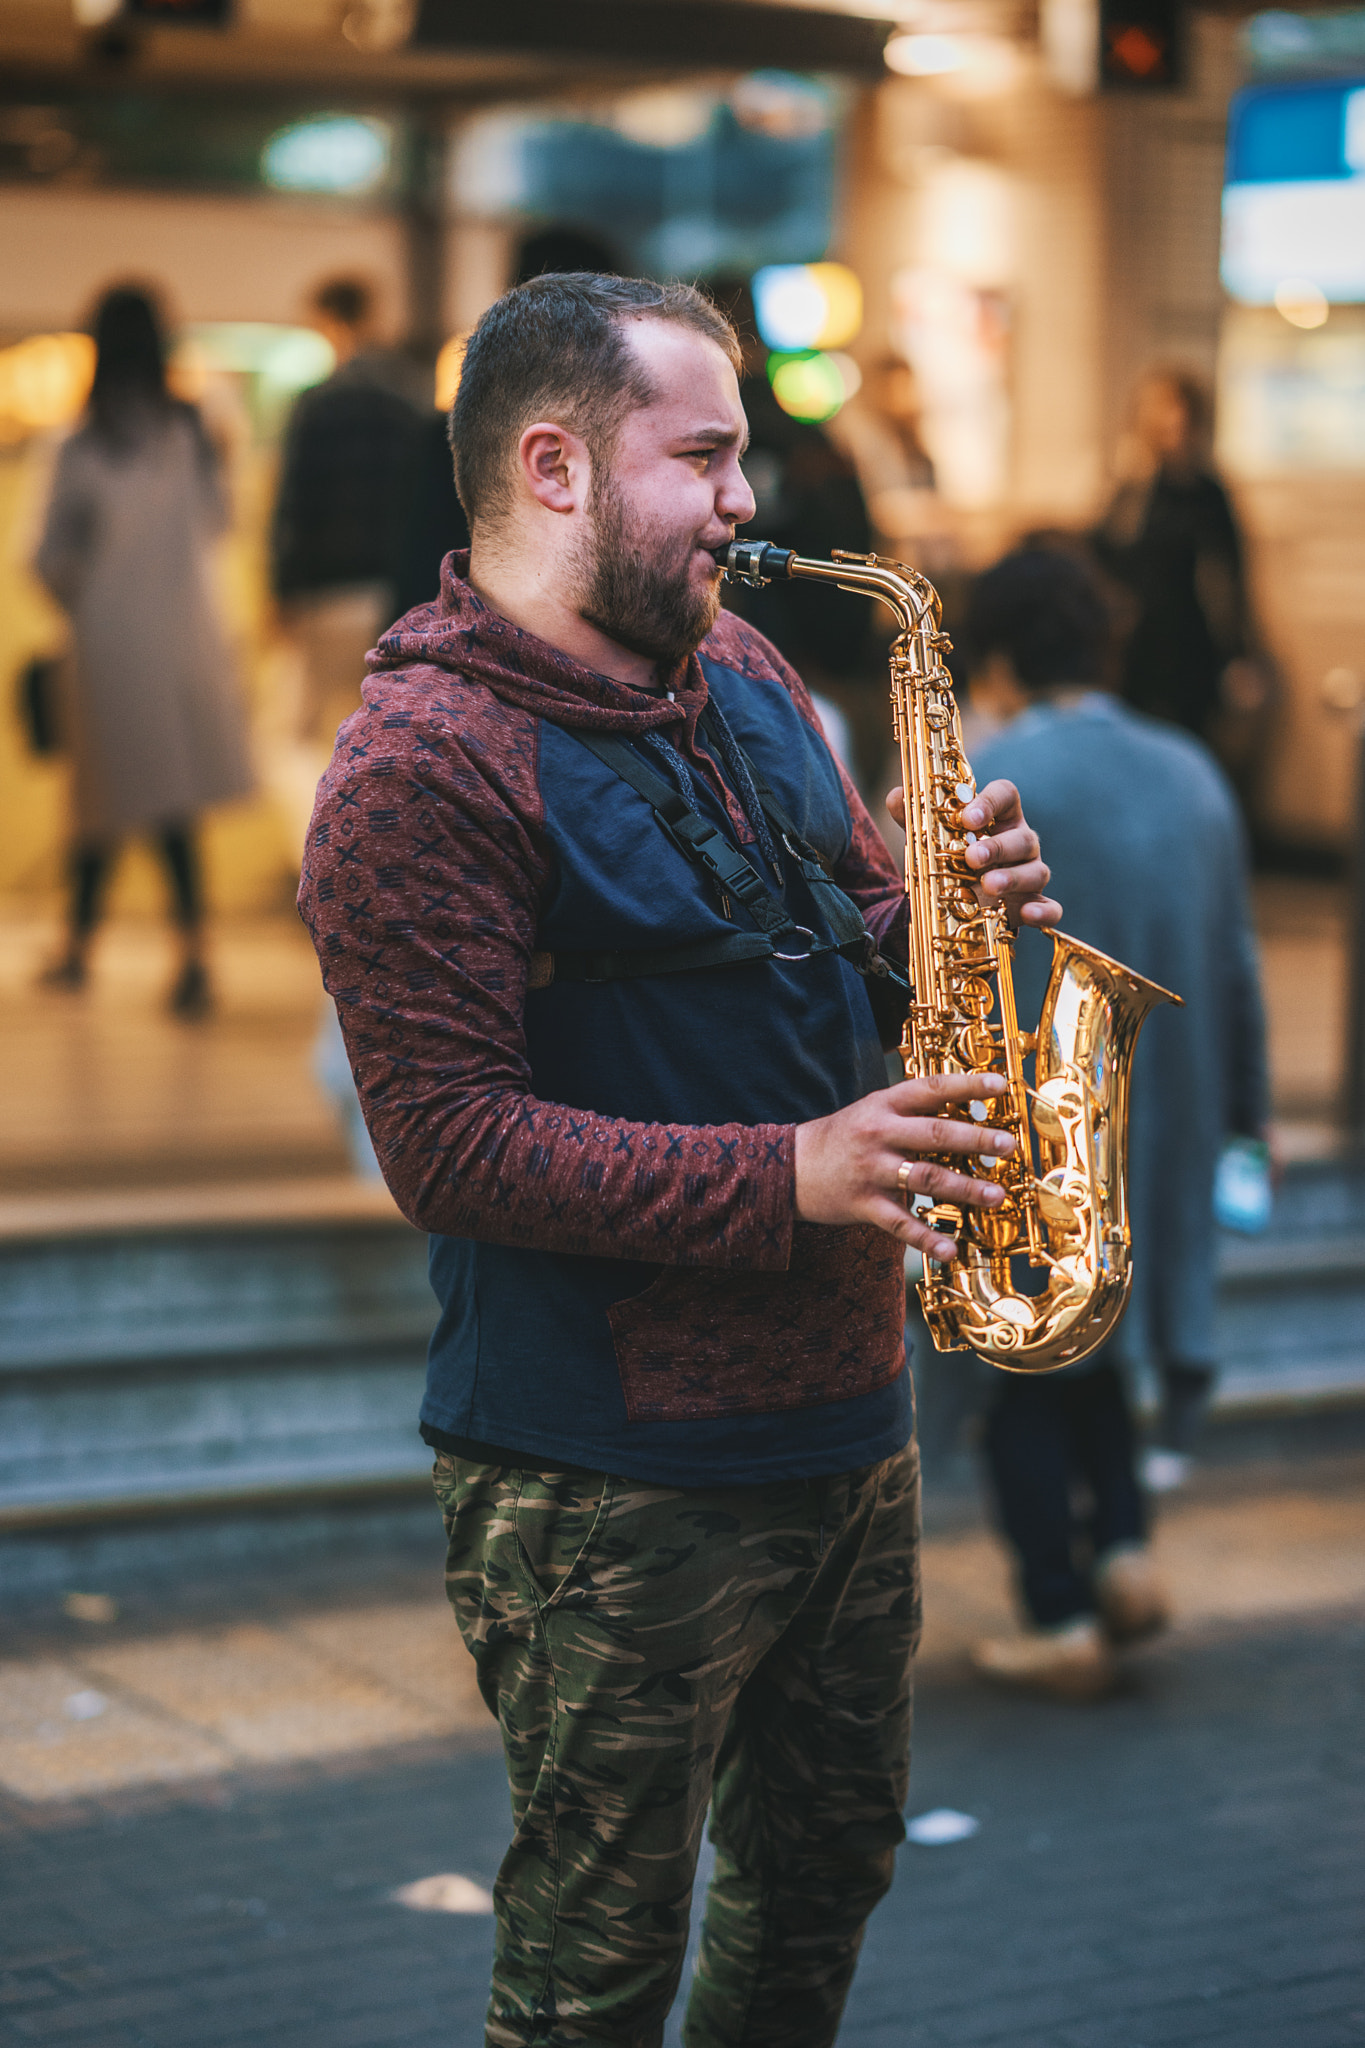 Sony a7 sample photo. Let's play saxophone photography